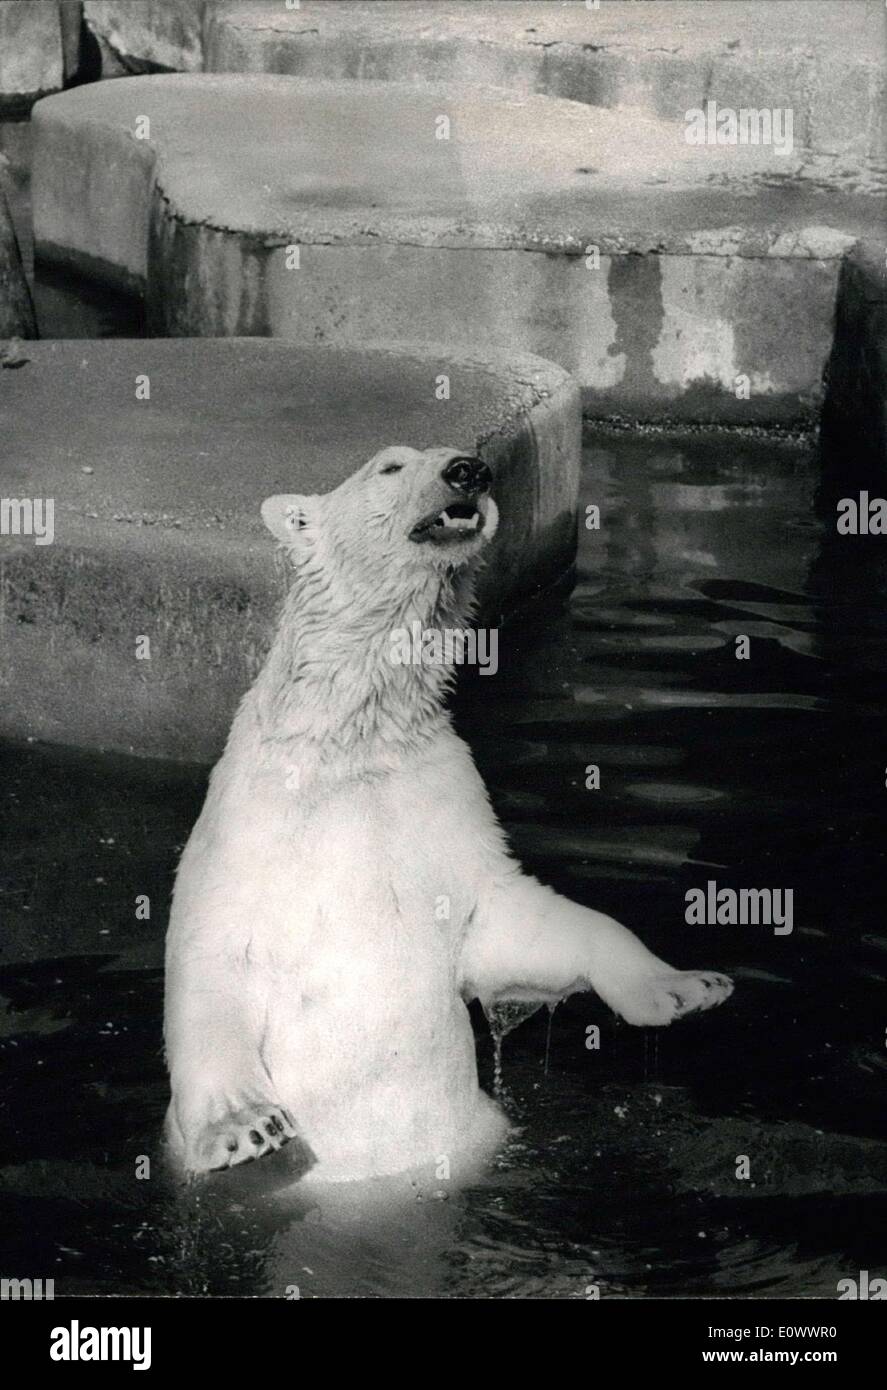 May 12, 1964 - Is the water cool enough? Paris had one of his warmest day today. The scene at the zoo was one of effervescence as the polar animals melt the first heat of the season. Photo Shows Deciding to flee from the heat, this polar bear has plunced into the sea and seems to think it is cool enough for him. Stock Photo